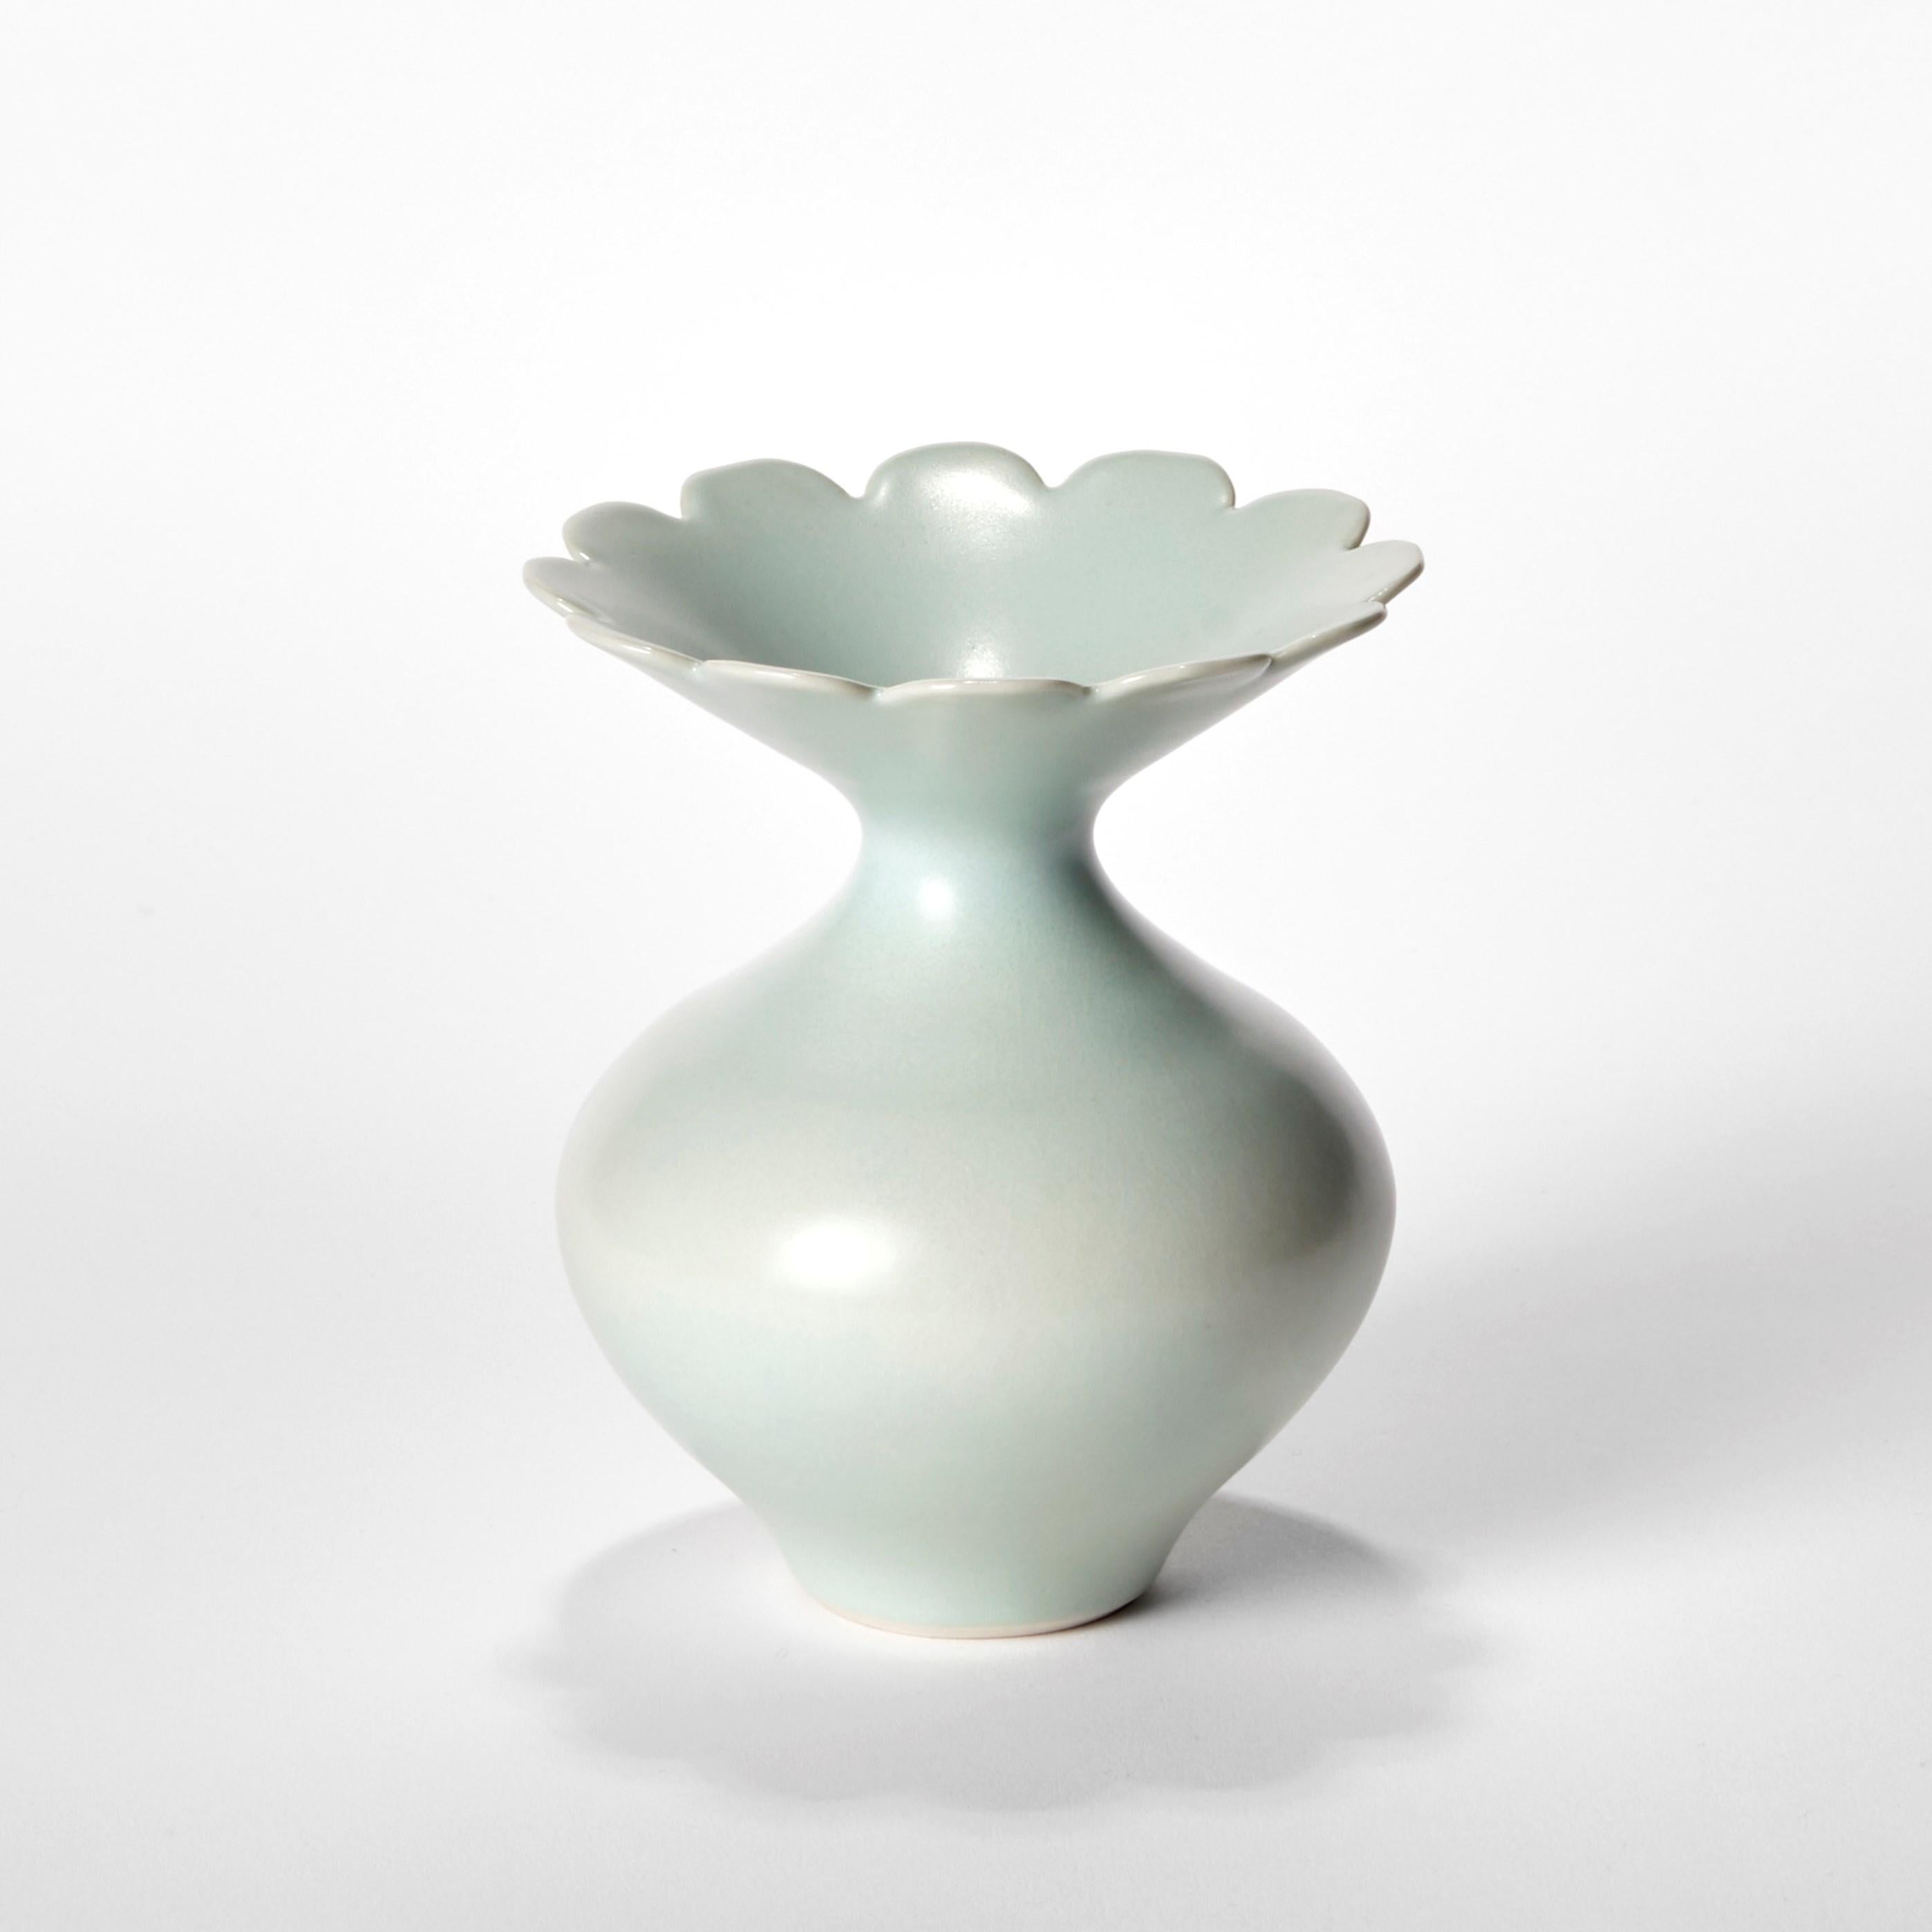 Hand-Crafted Celadon Trio, still life of three hand thrown porcelain vases by Vivienne Foley For Sale